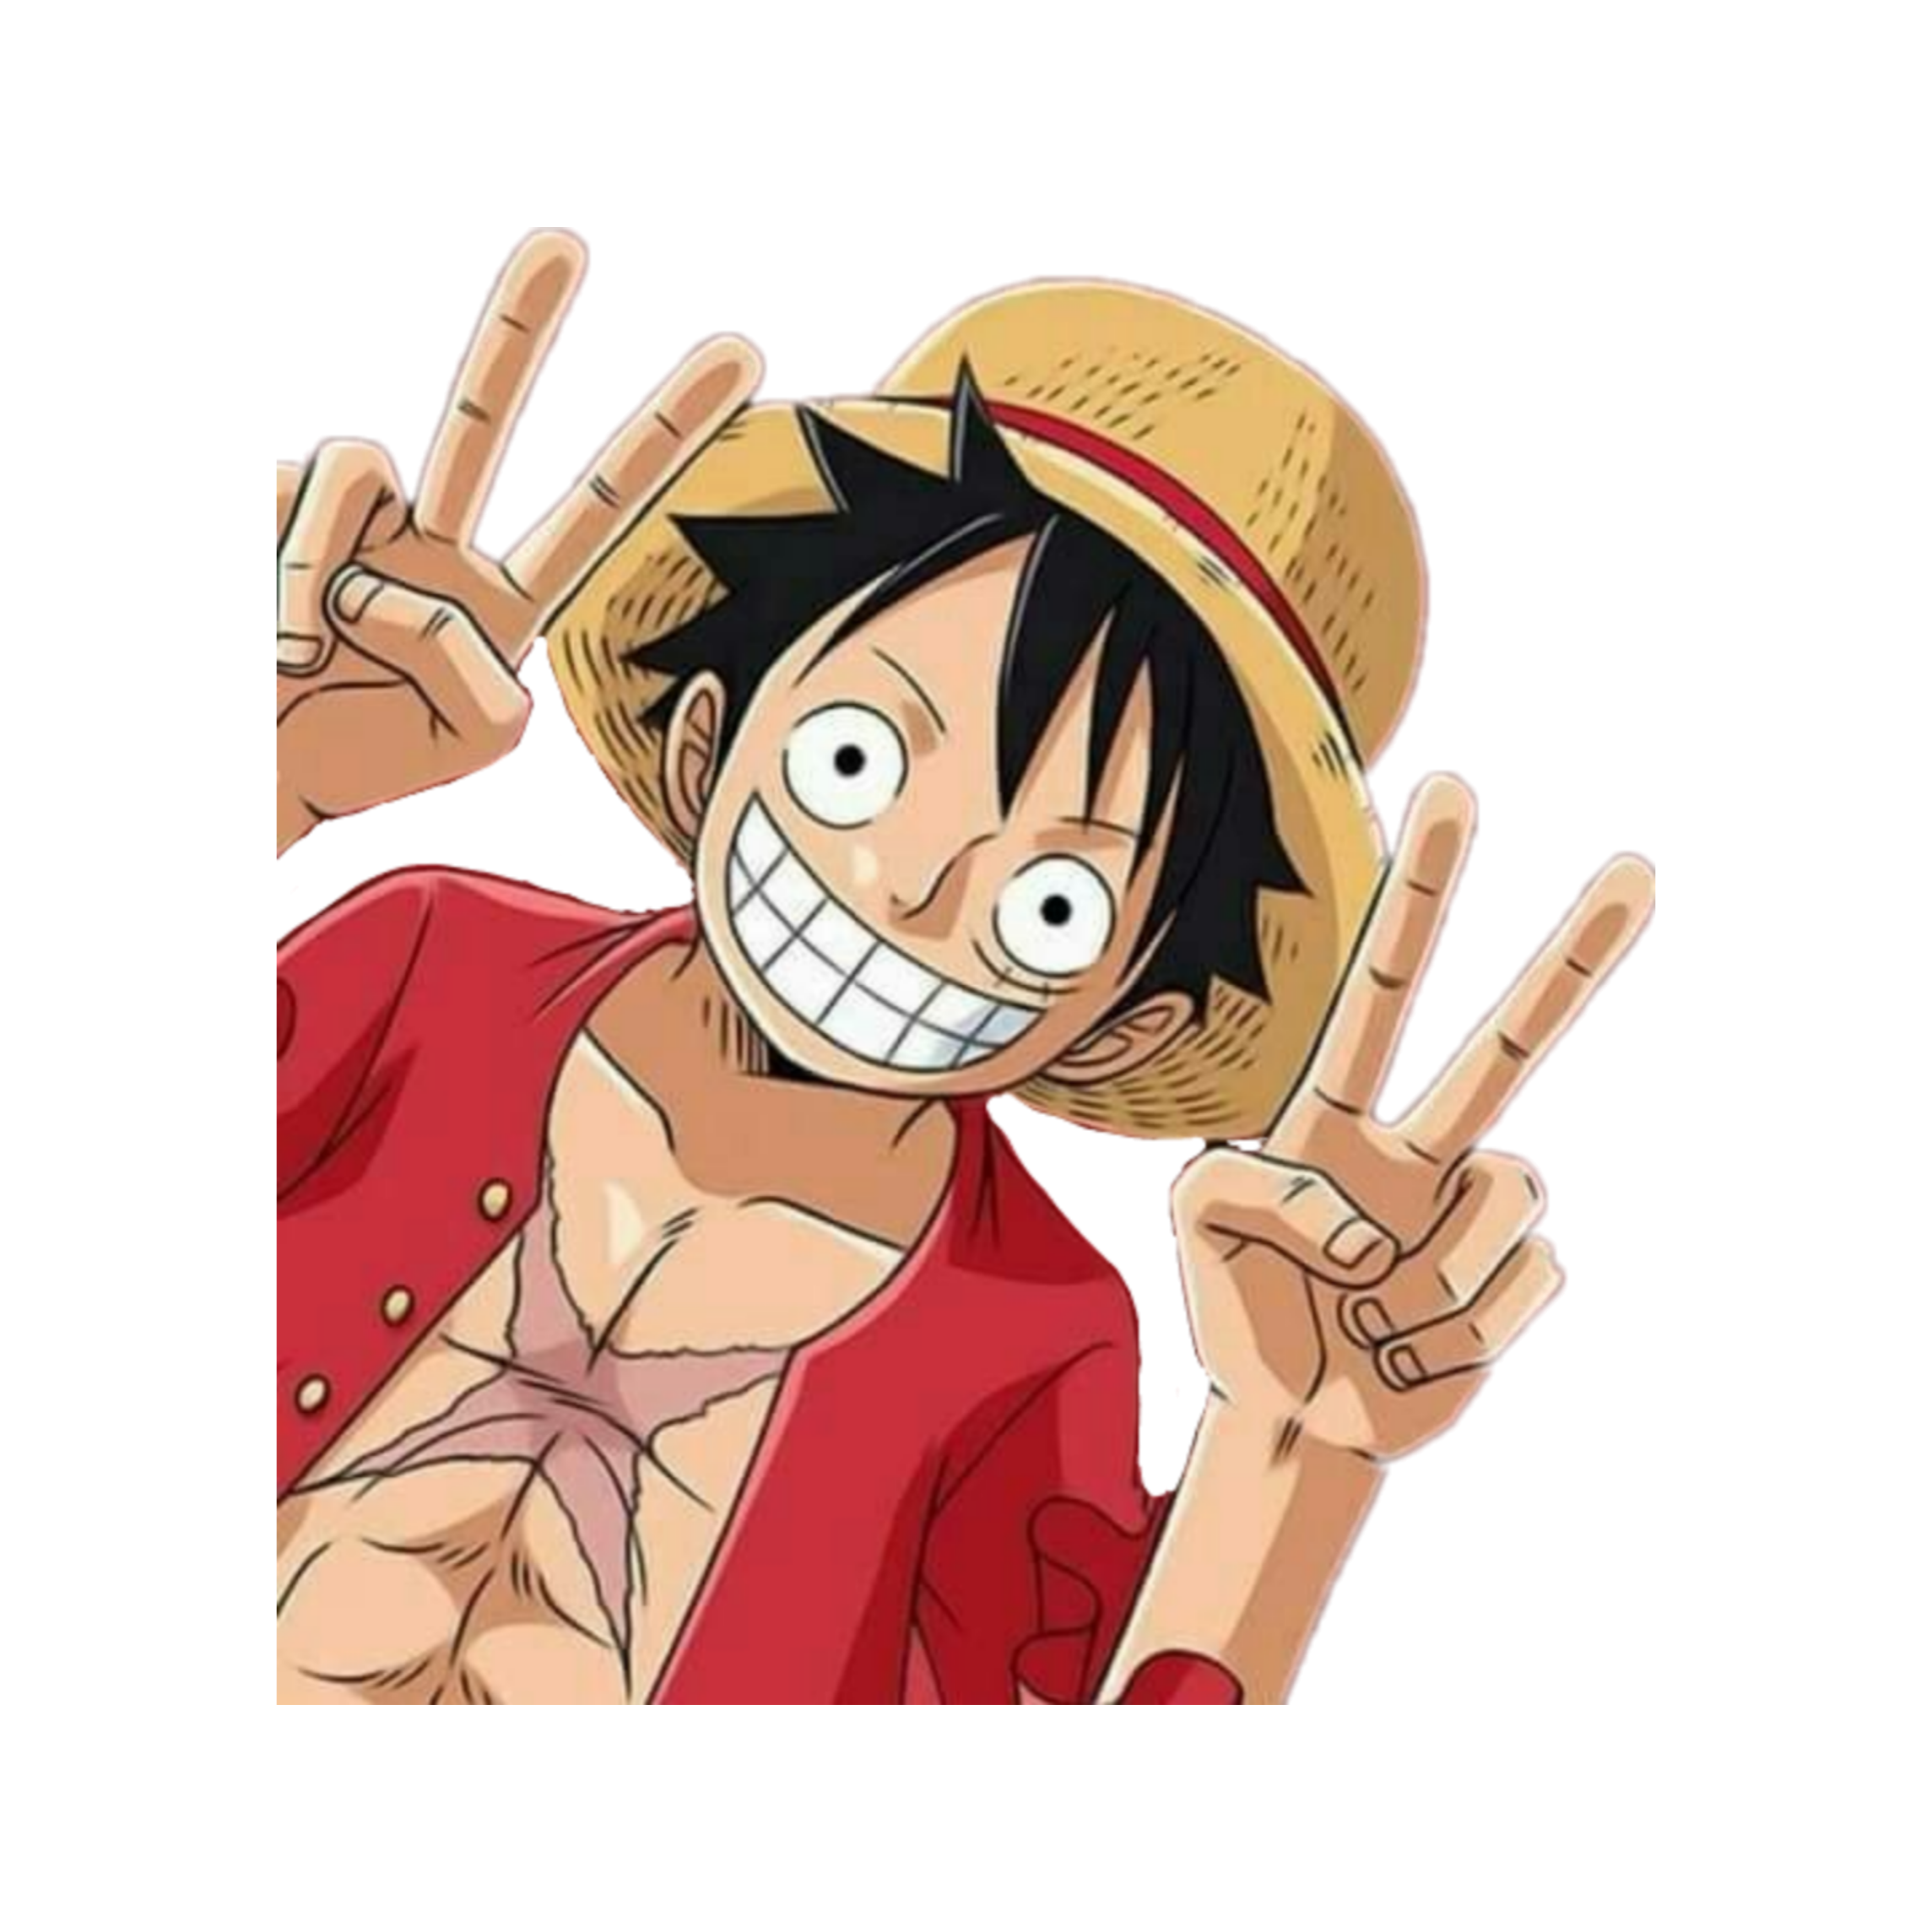 This visual is about luffy freetoedit #Luffy.